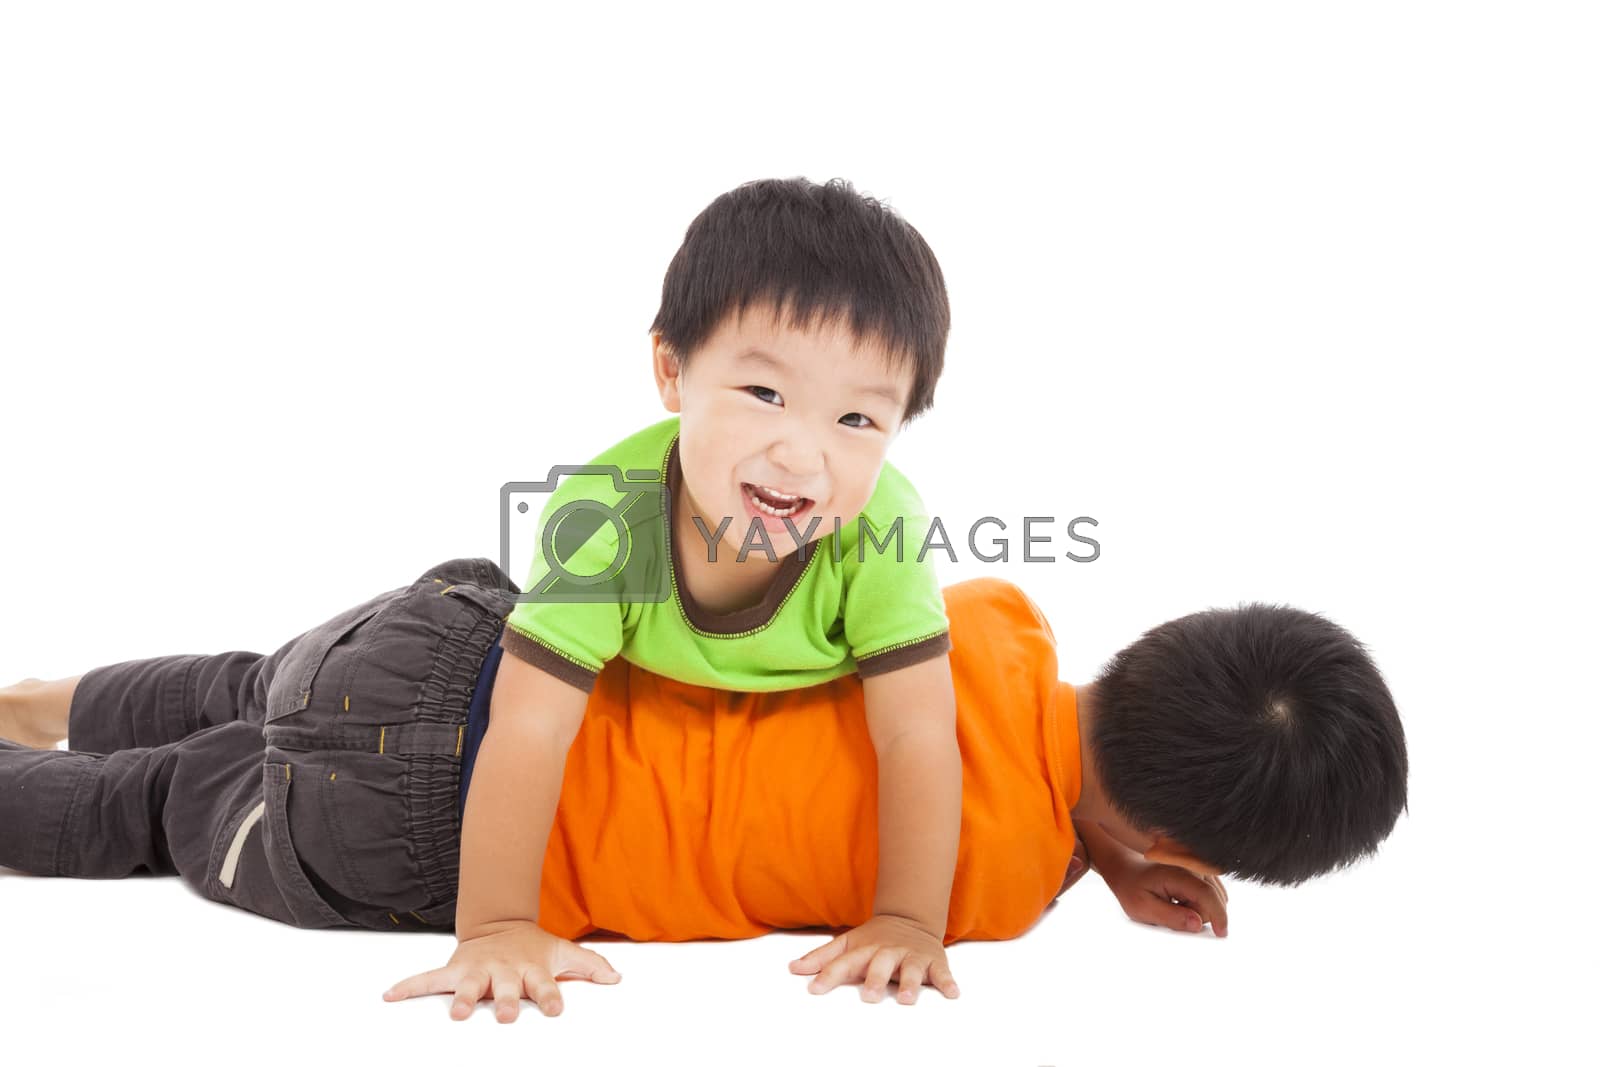 Royalty free image of happy little boy playing with his bother on the floor by tomwang